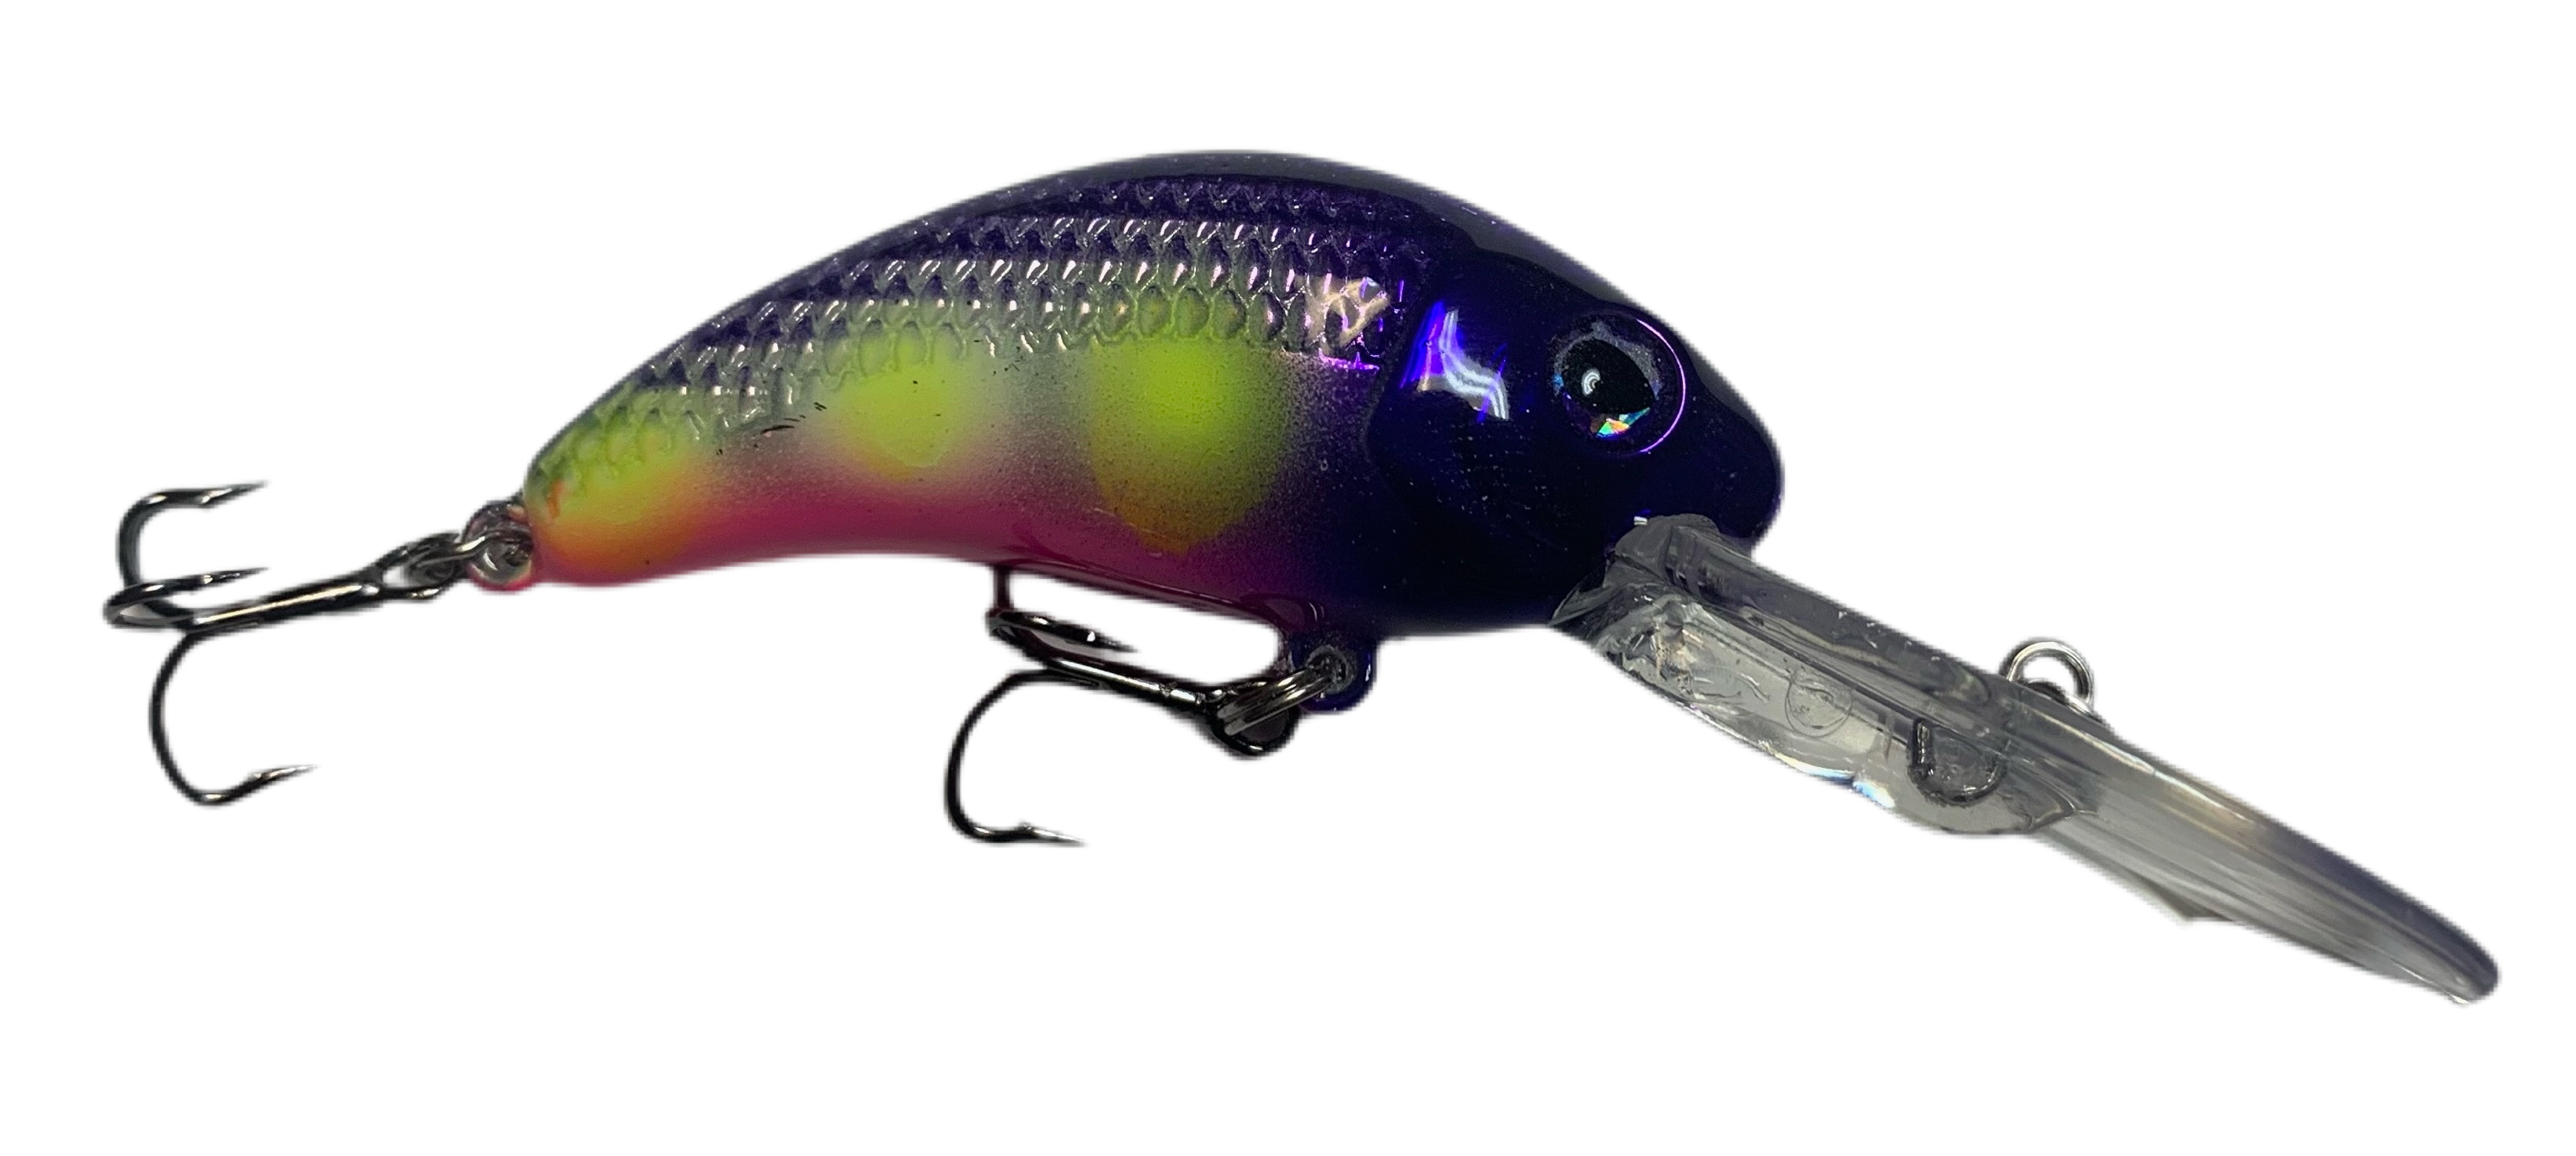 Plug Fishing Baits & Lures Rapala Fishing Tackle Fish Hook, PNG,  2000x1430px, Plug, Artificial Fly, Bait, Bait Fish, Bass Download Free